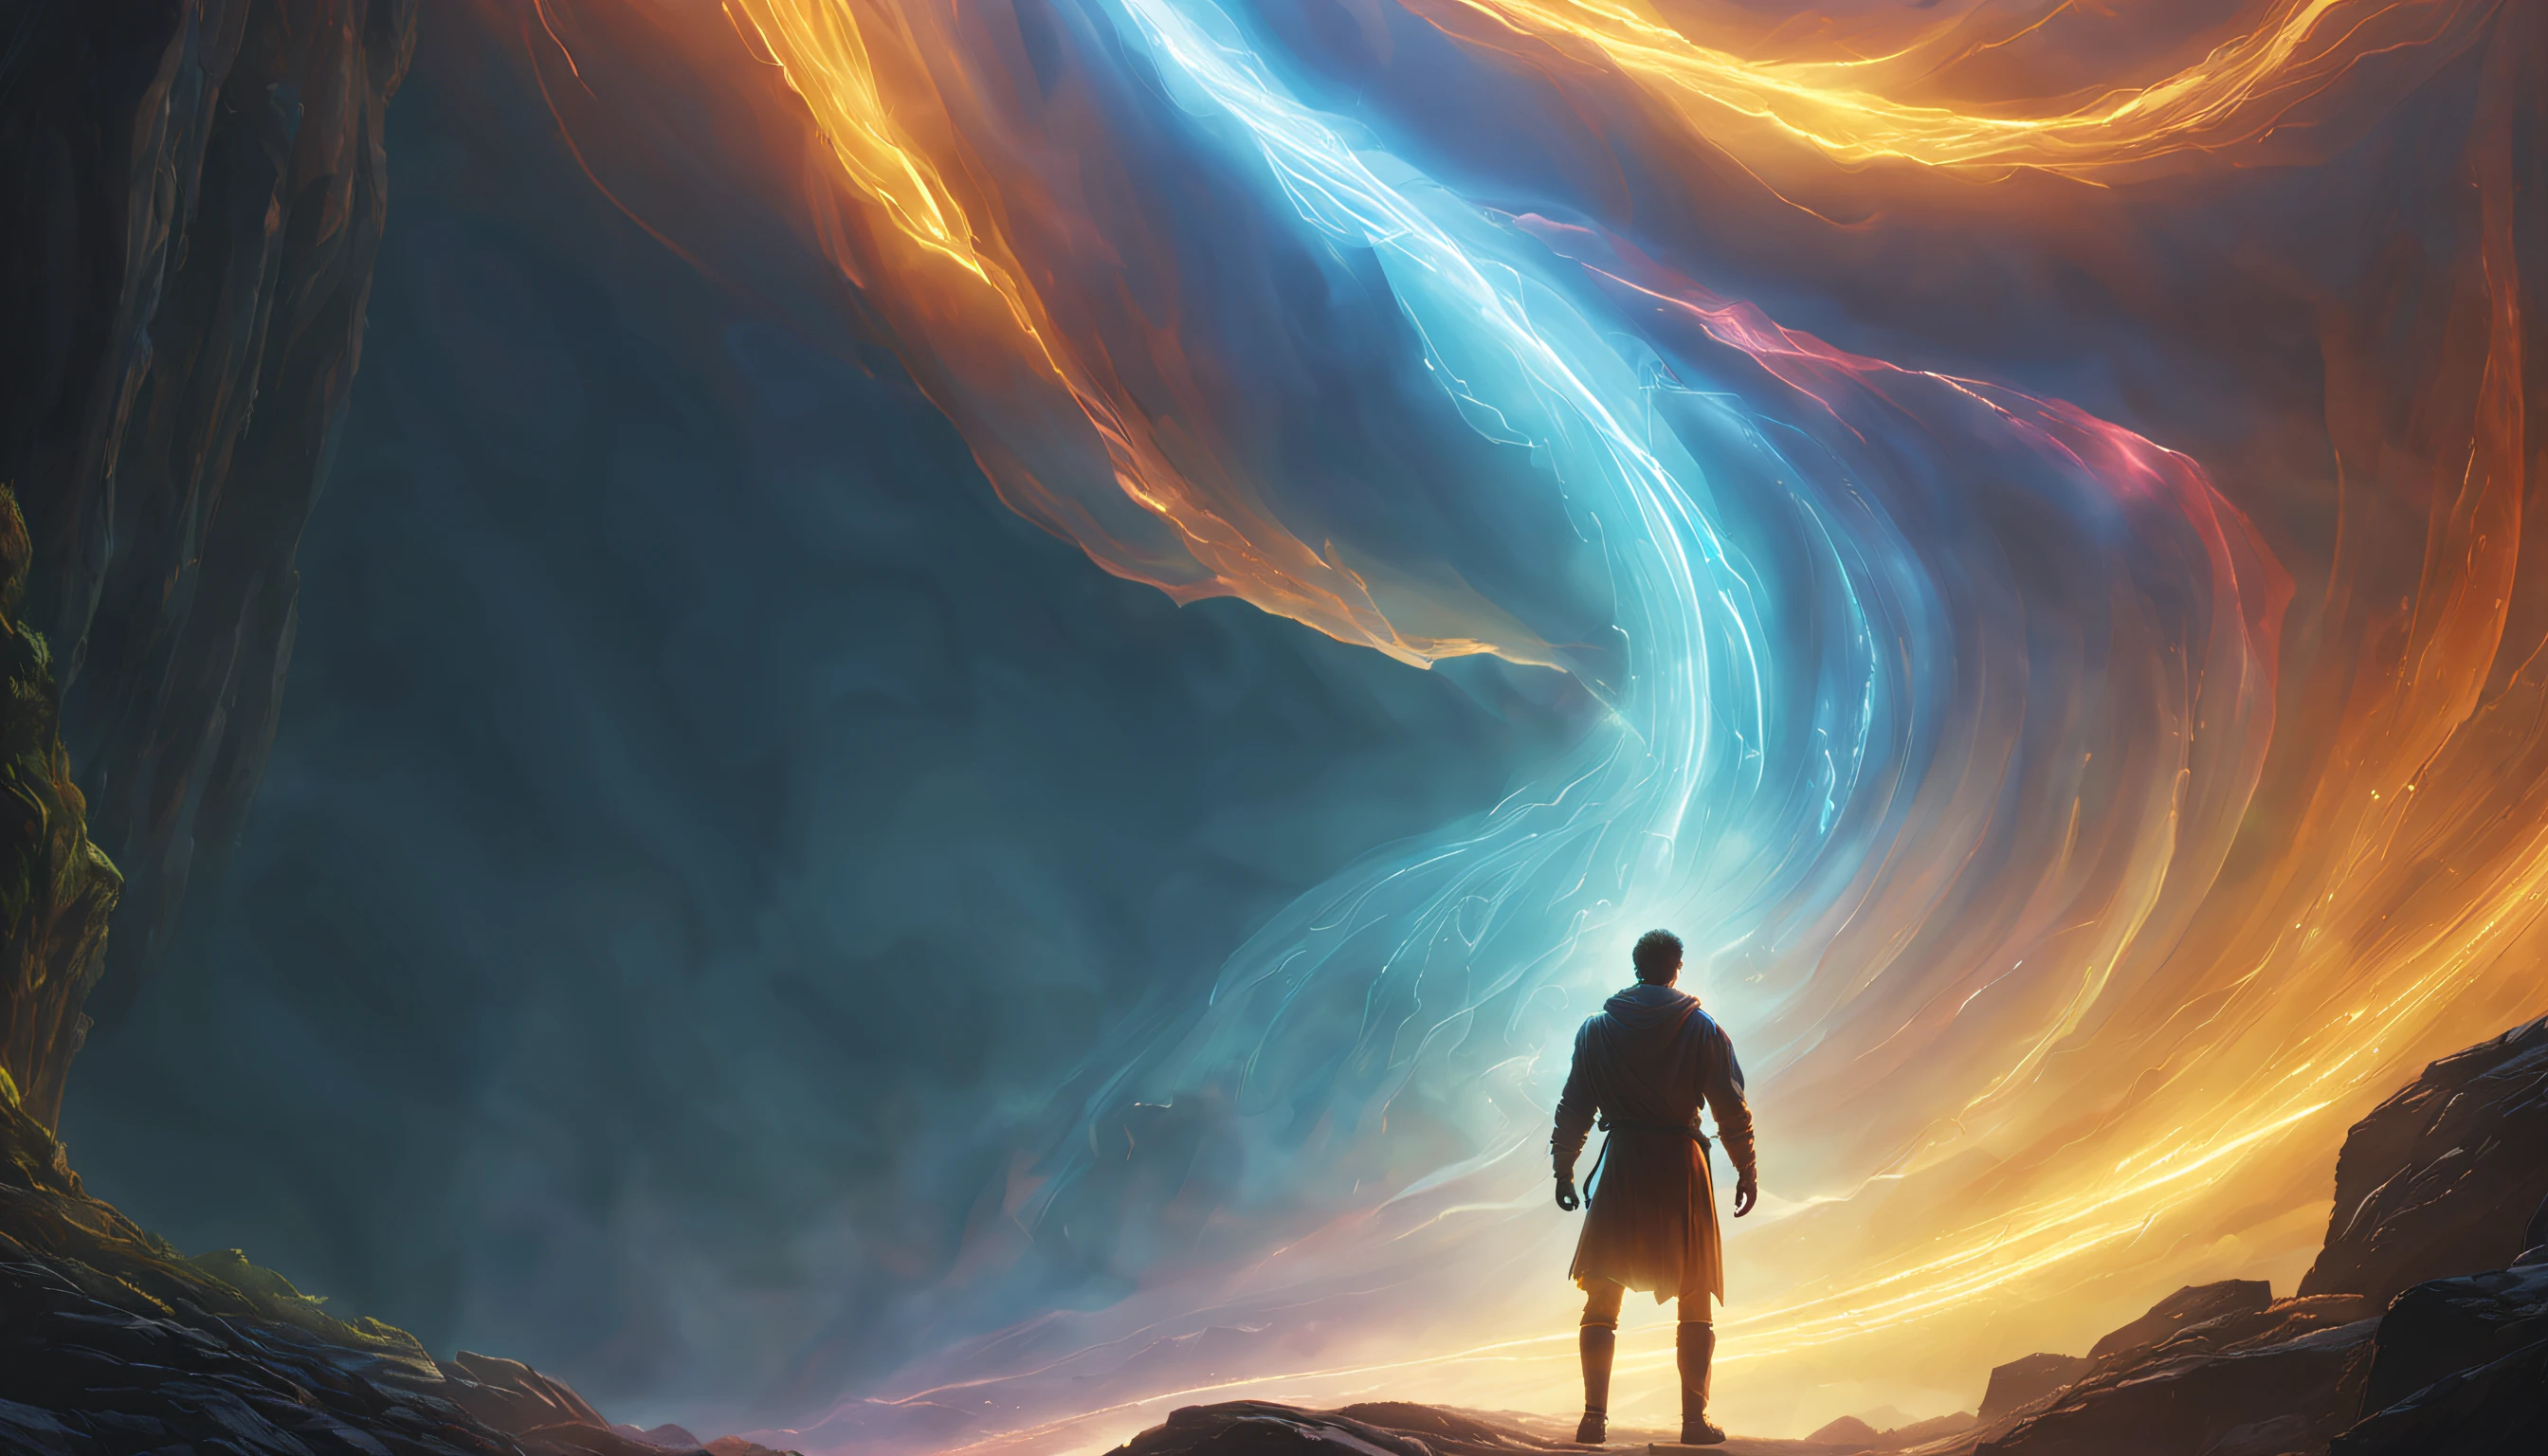 far distant man in a bright glowing aura of light, ascension, UHD, by Aleksi Briclot and Alessio Albi and Alexandre Cabanel, unzoom